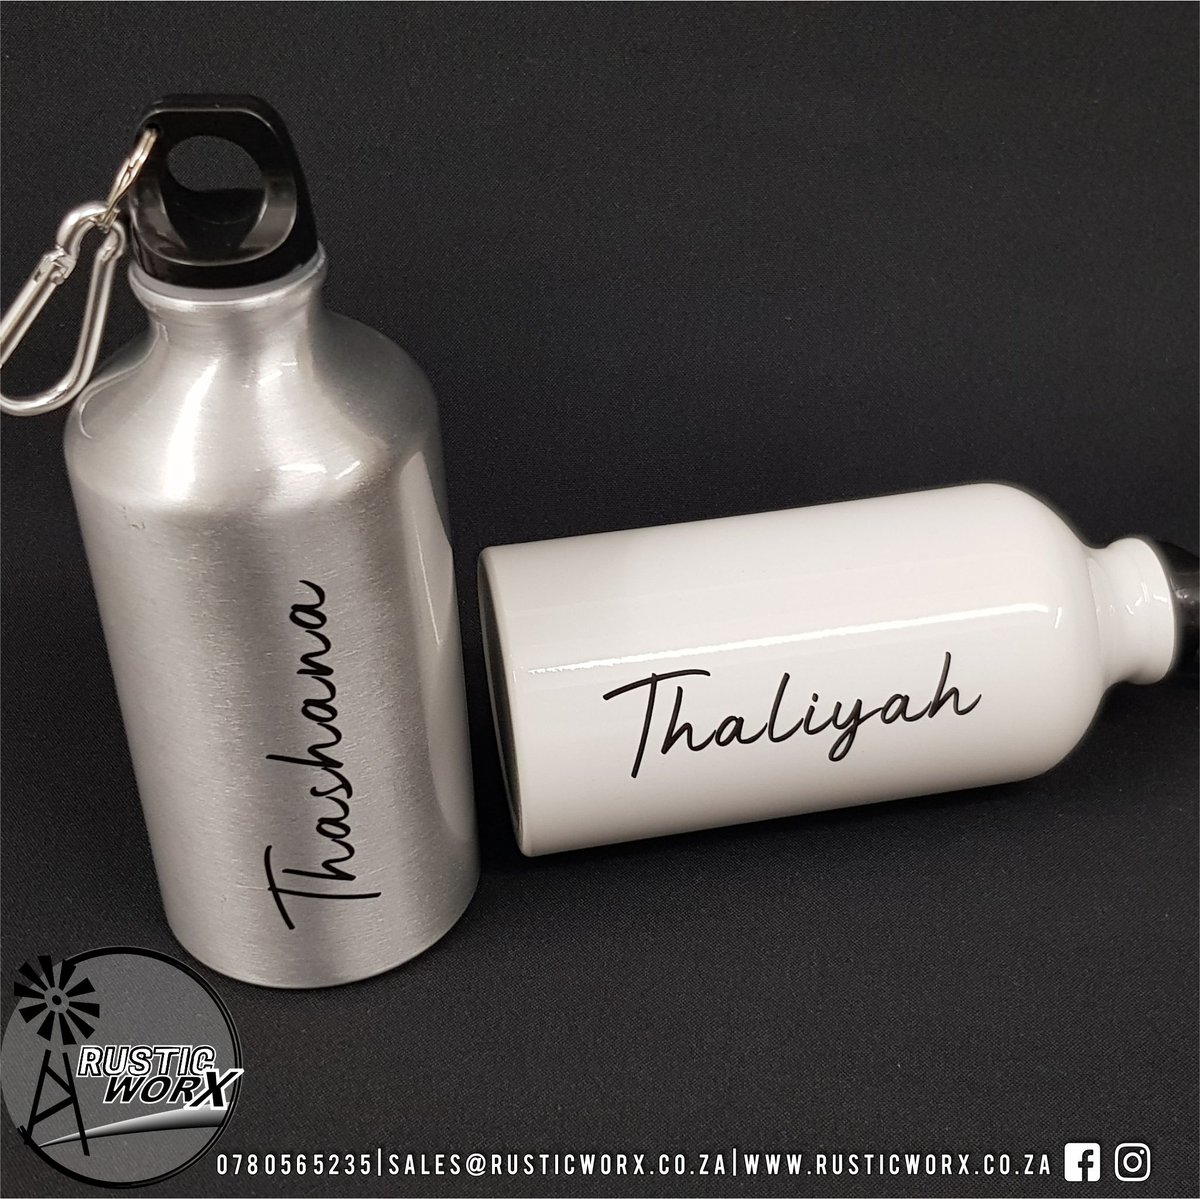 Customised aluminium water bottles, perfect Christmas or birthday gift.

Visit our website rusticworx.co.za or Contact us on sales@rusticworx.co.za 
#xmasgifts #birthdaygift #waterbottle #customwaterbottle #bestmangift #bridesmaidgift   #rusticworx #supportlocal